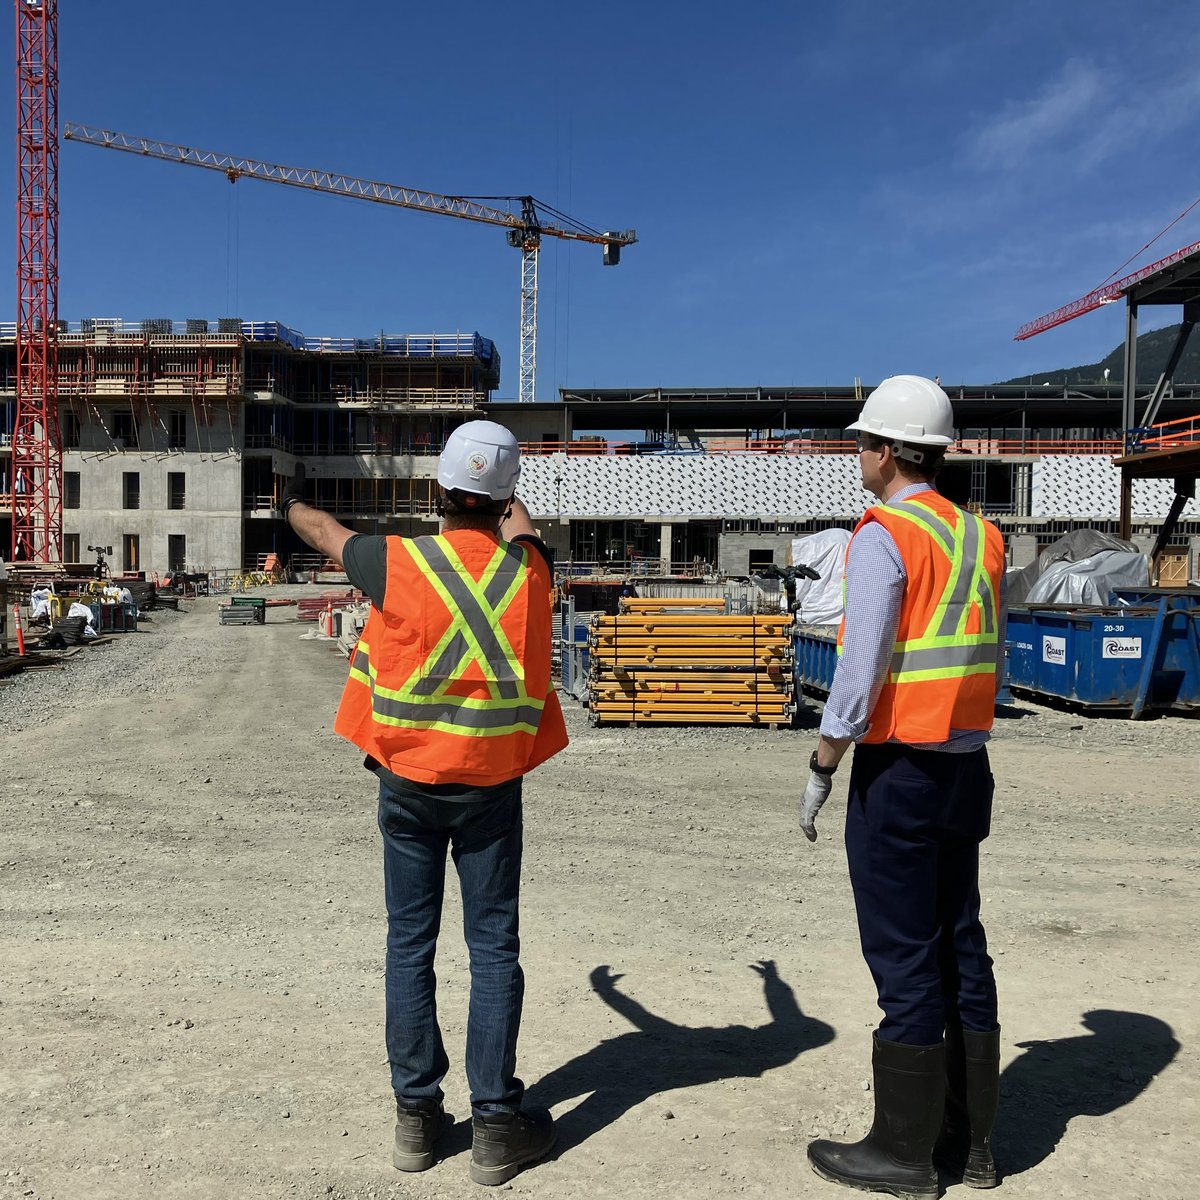 Today I toured the Cowichan Valley District Hospital replacement project site. Glad to see the care put in to the build, and the progress being made. Looking forward to the day it opens and expands access to vital health care services for people in the Cowichan Valley. #CVRD #BC